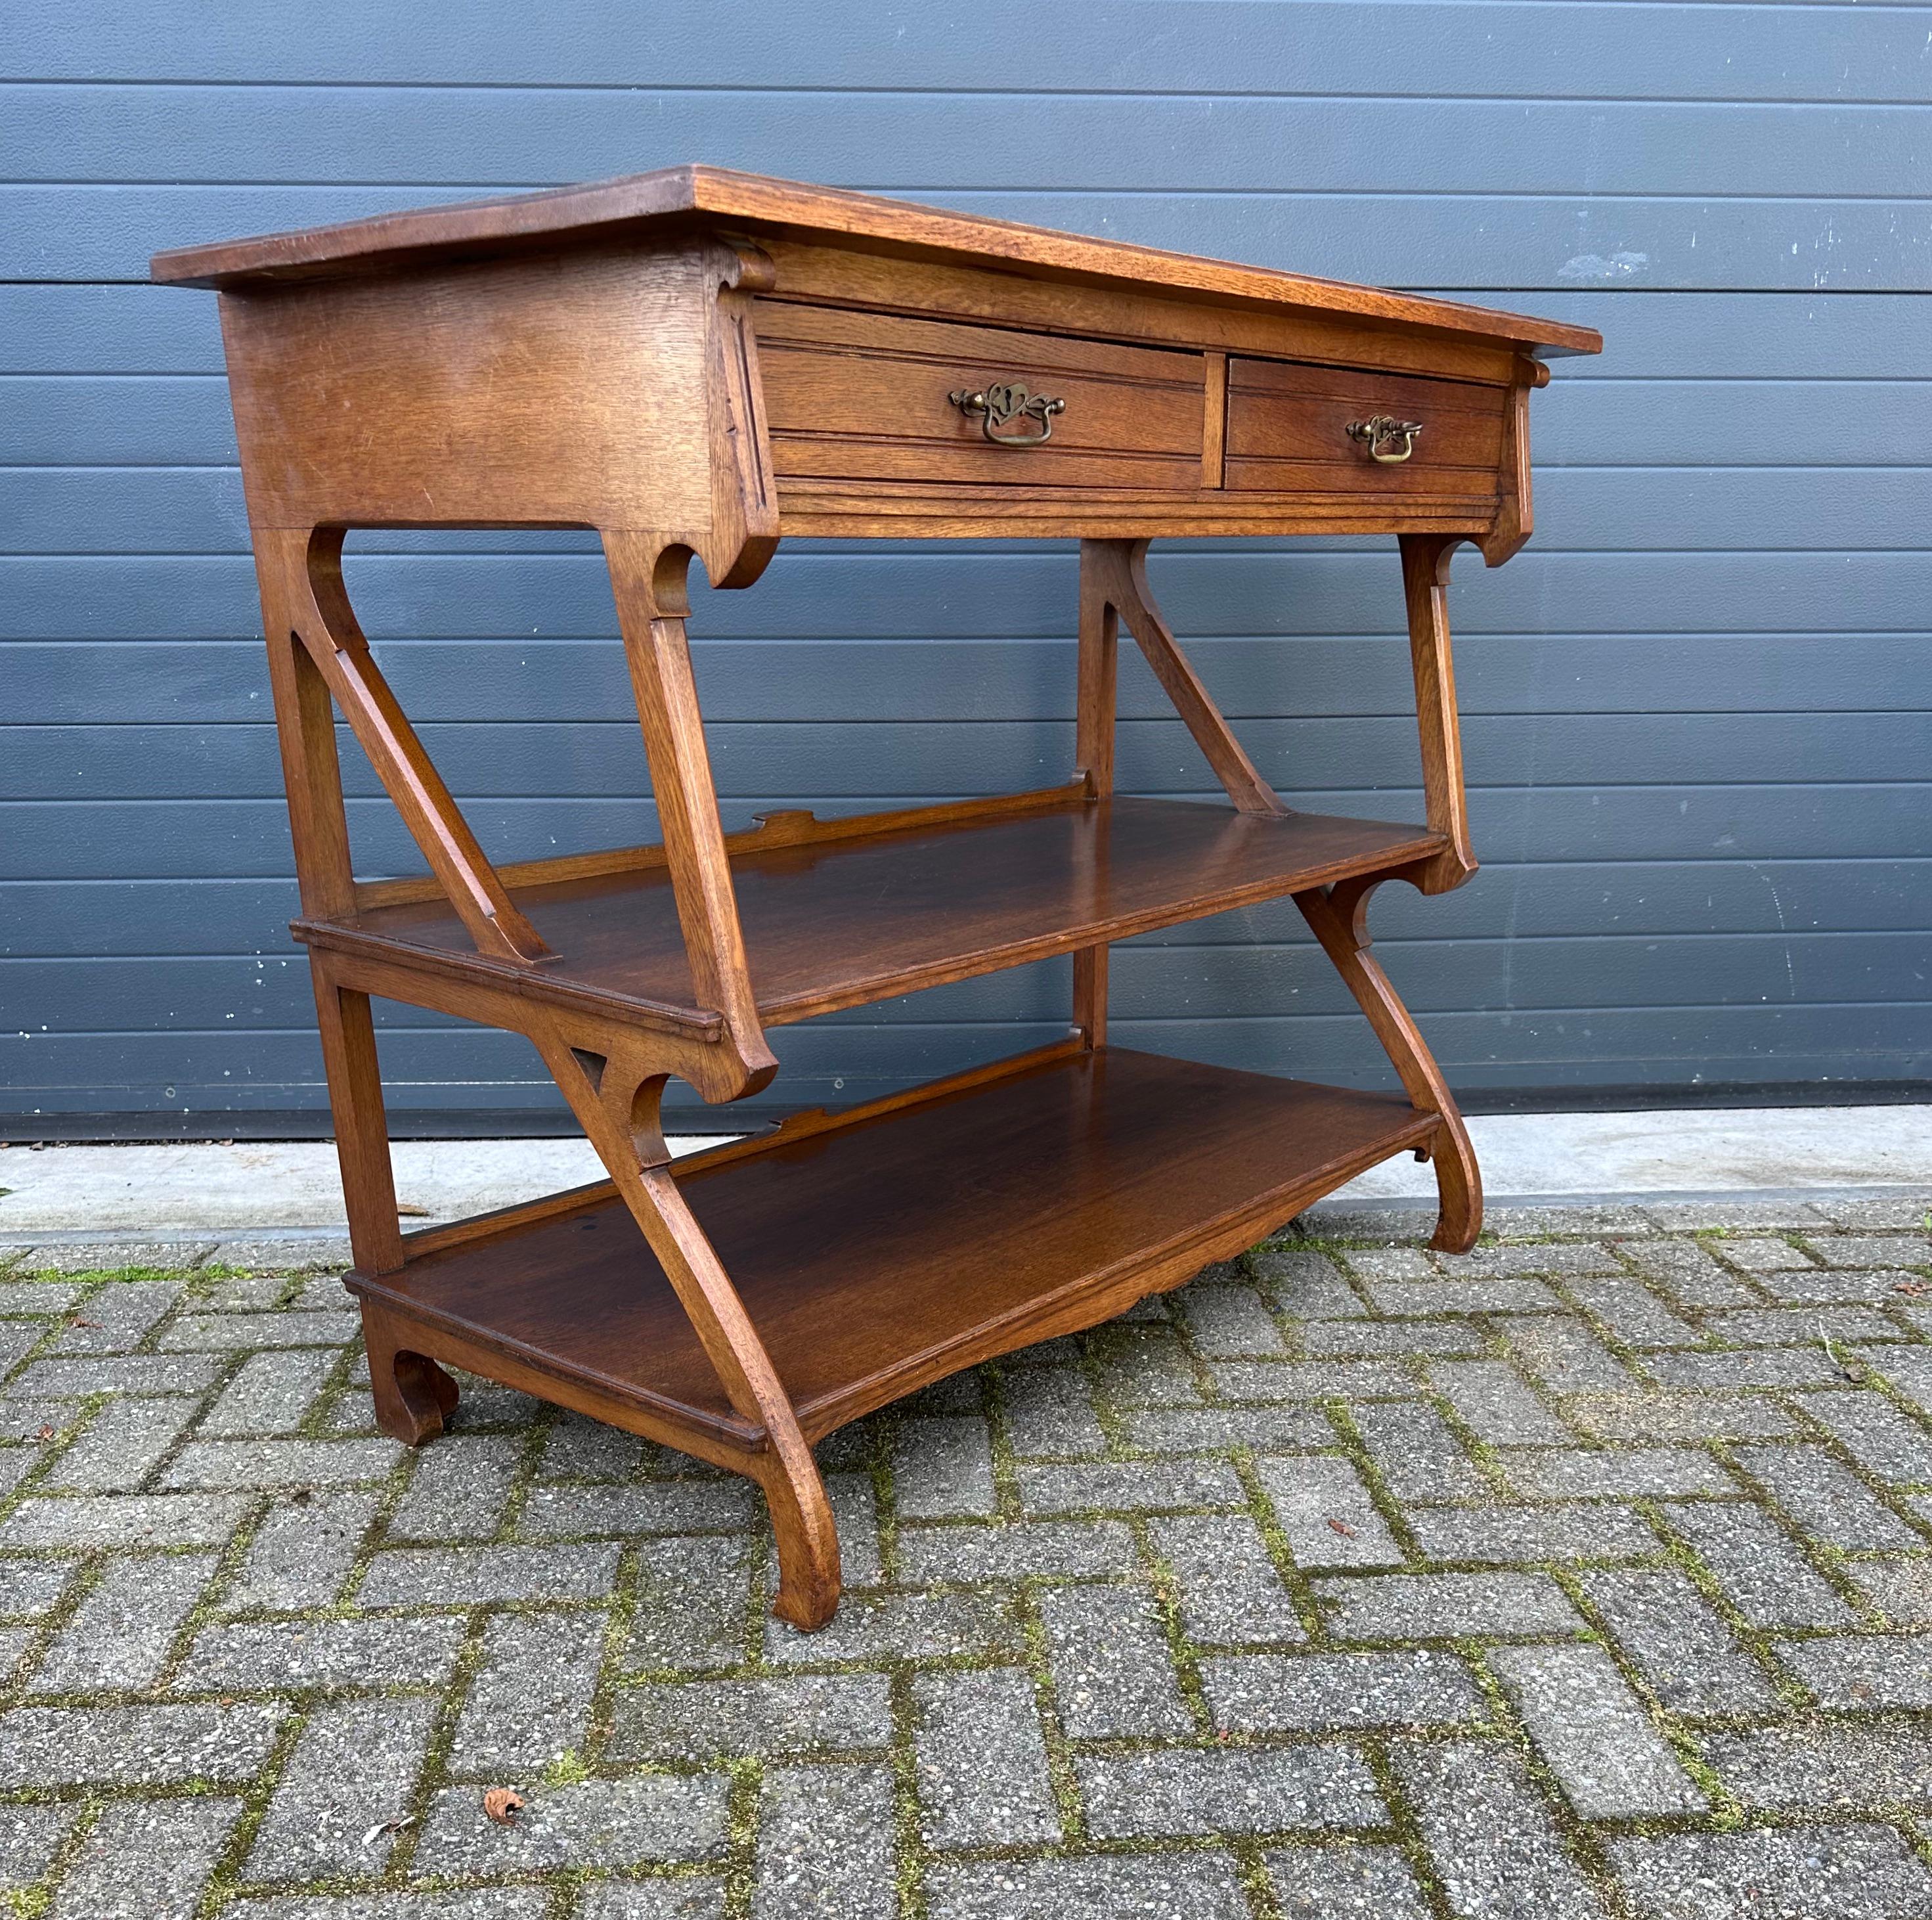 Pure Art Nouveau and good size, three shelf side table.

This early and good size, Arts & Crafts period sideboard with its stunning design makes a great statement piece for your private library or living room. In our view this is not merely a